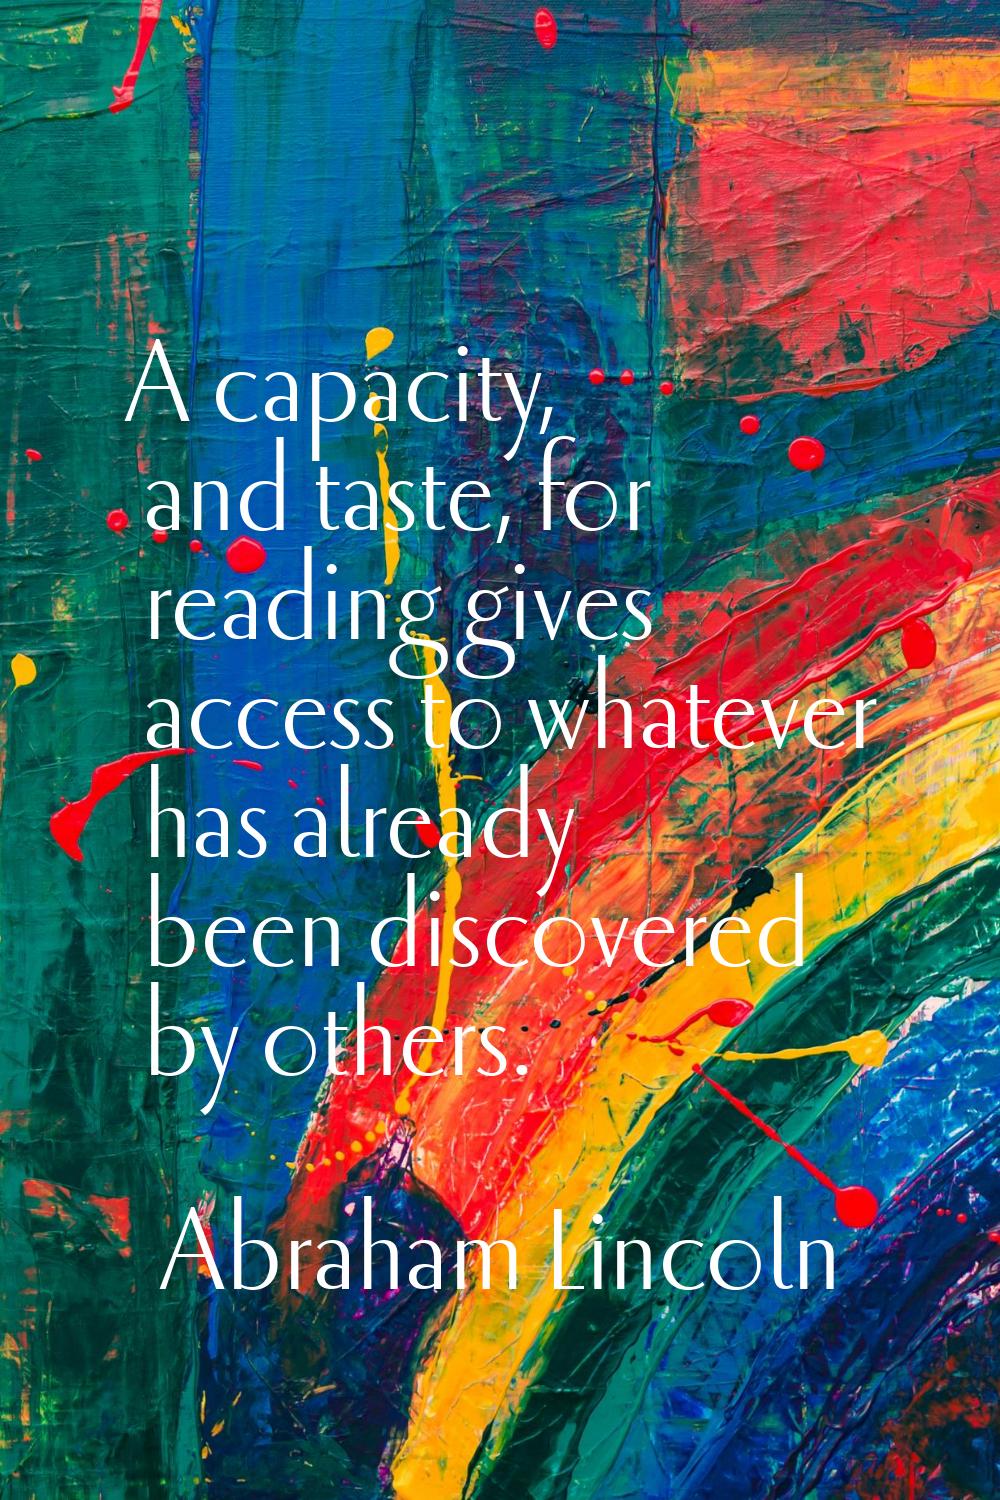 A capacity, and taste, for reading gives access to whatever has already been discovered by others.